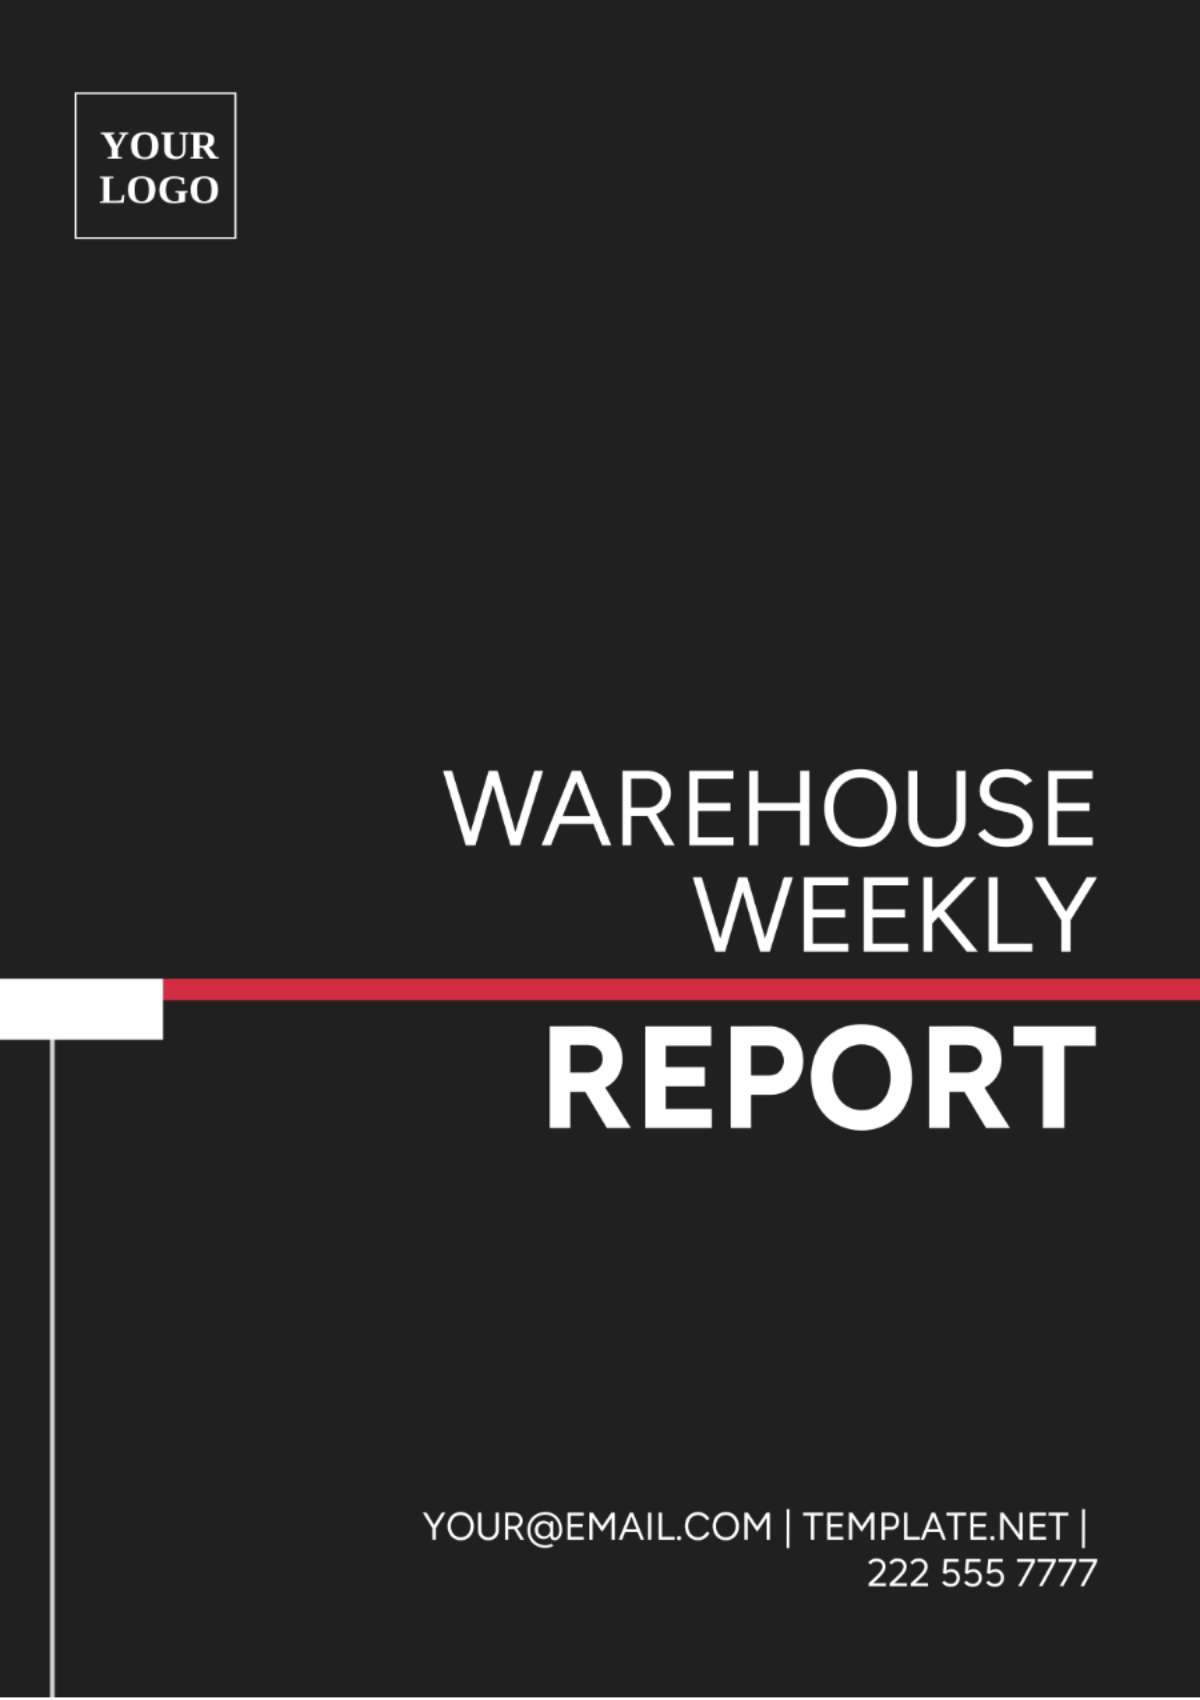 Warehouse Weekly Report Template